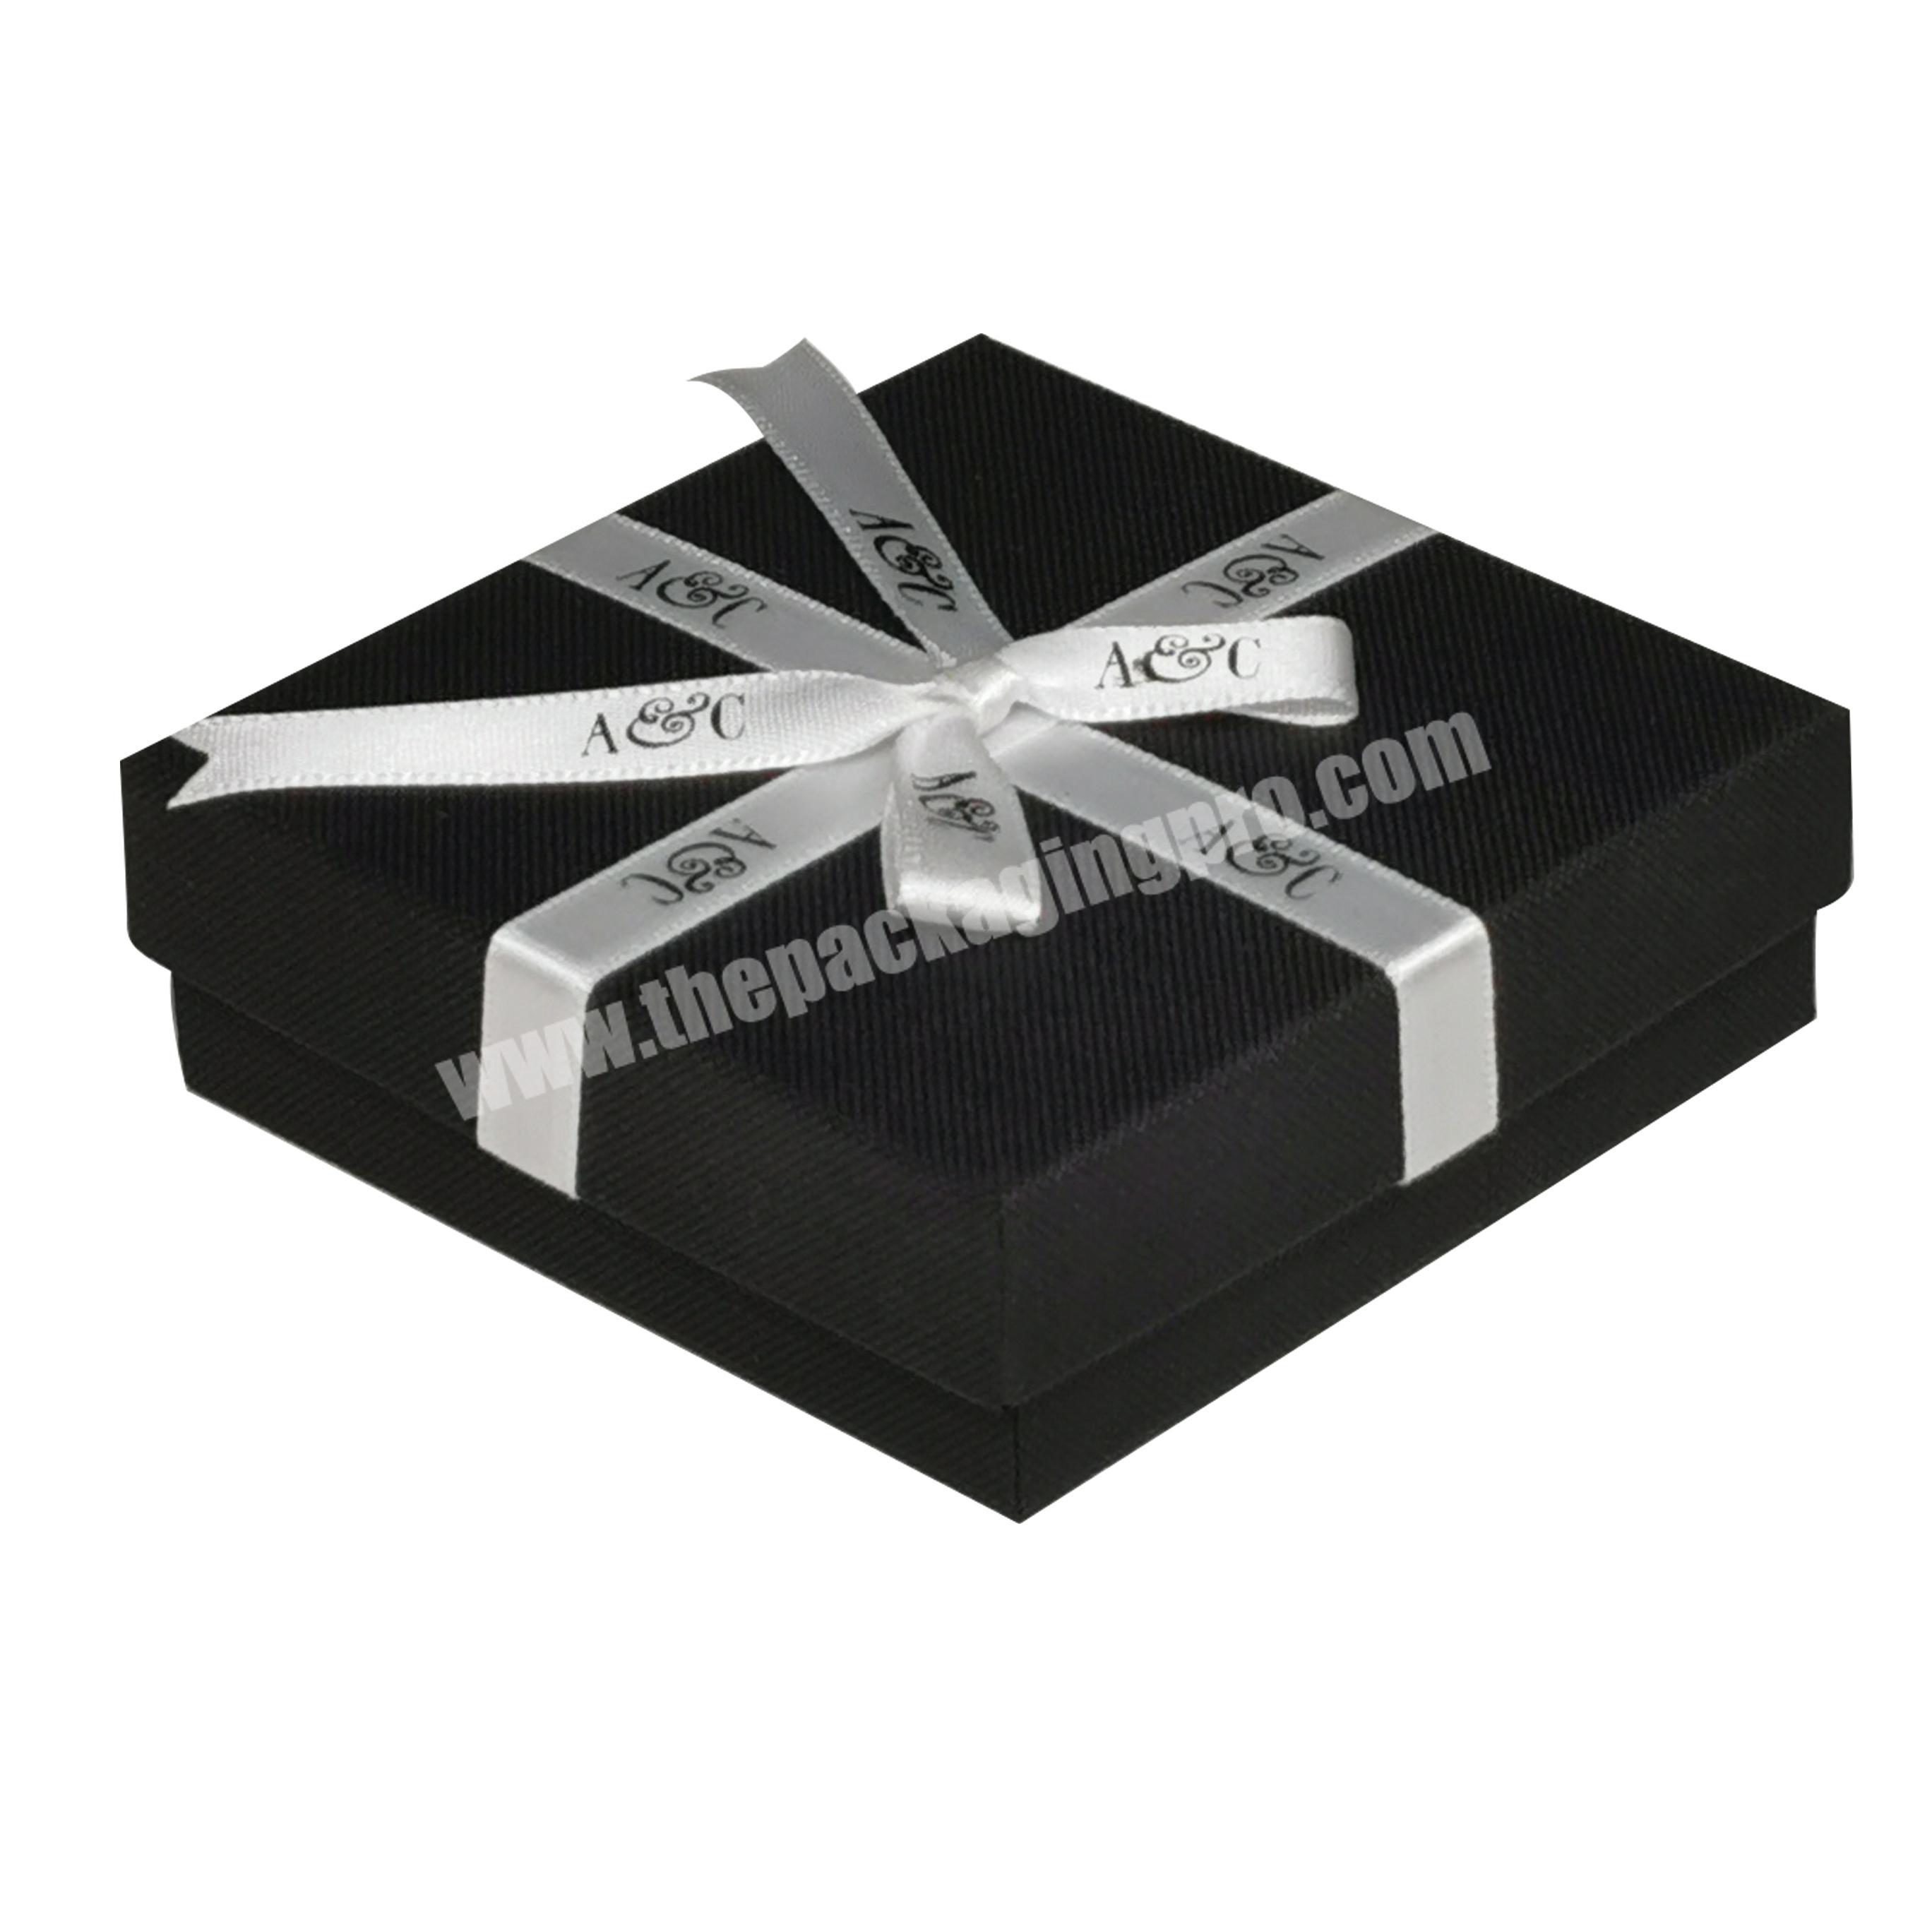 High Quality Low Price Luxury Custom Black Lid Gift Box and Base Packaging Box with Riband